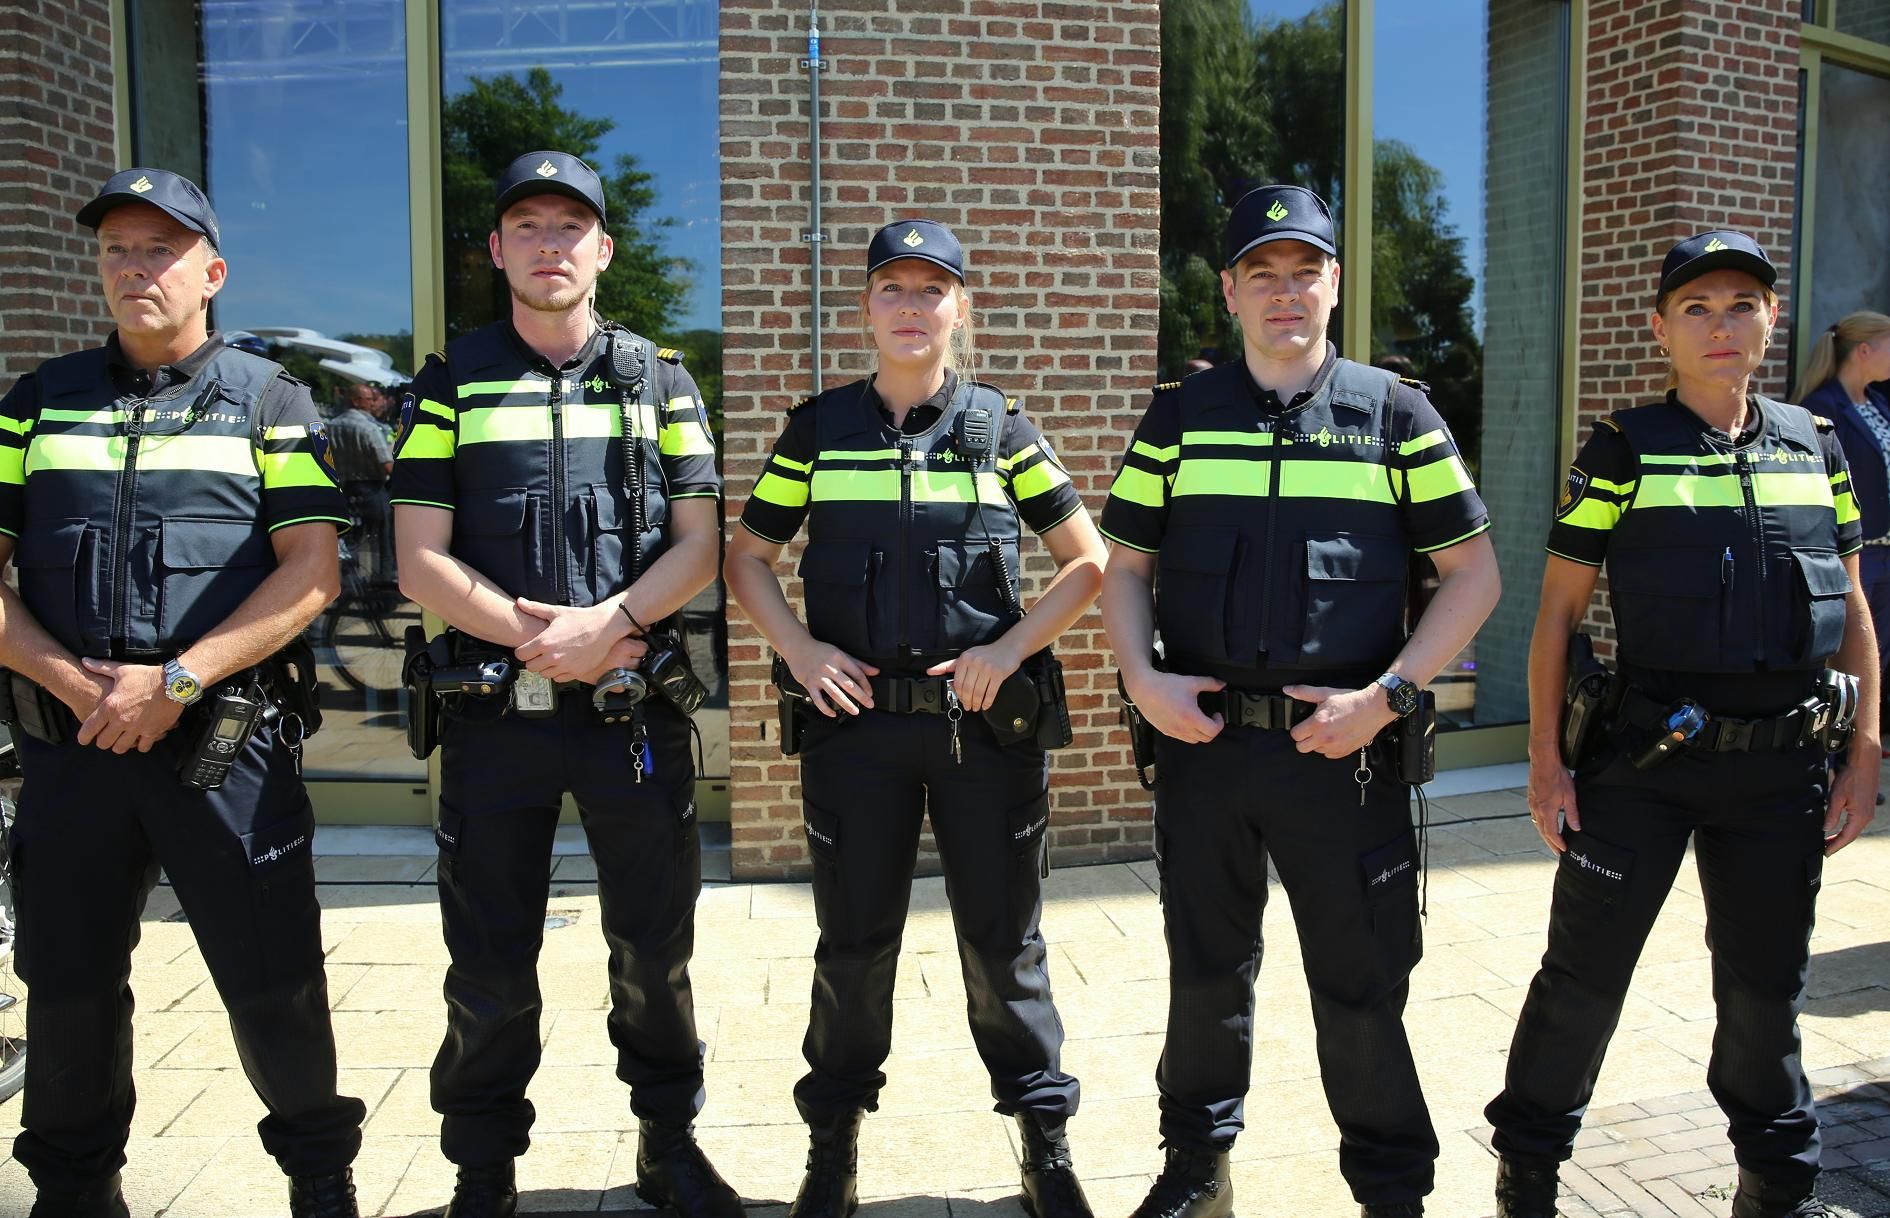 The Dutch police force, often known as the Gendarmerie or Royal Marechaussee